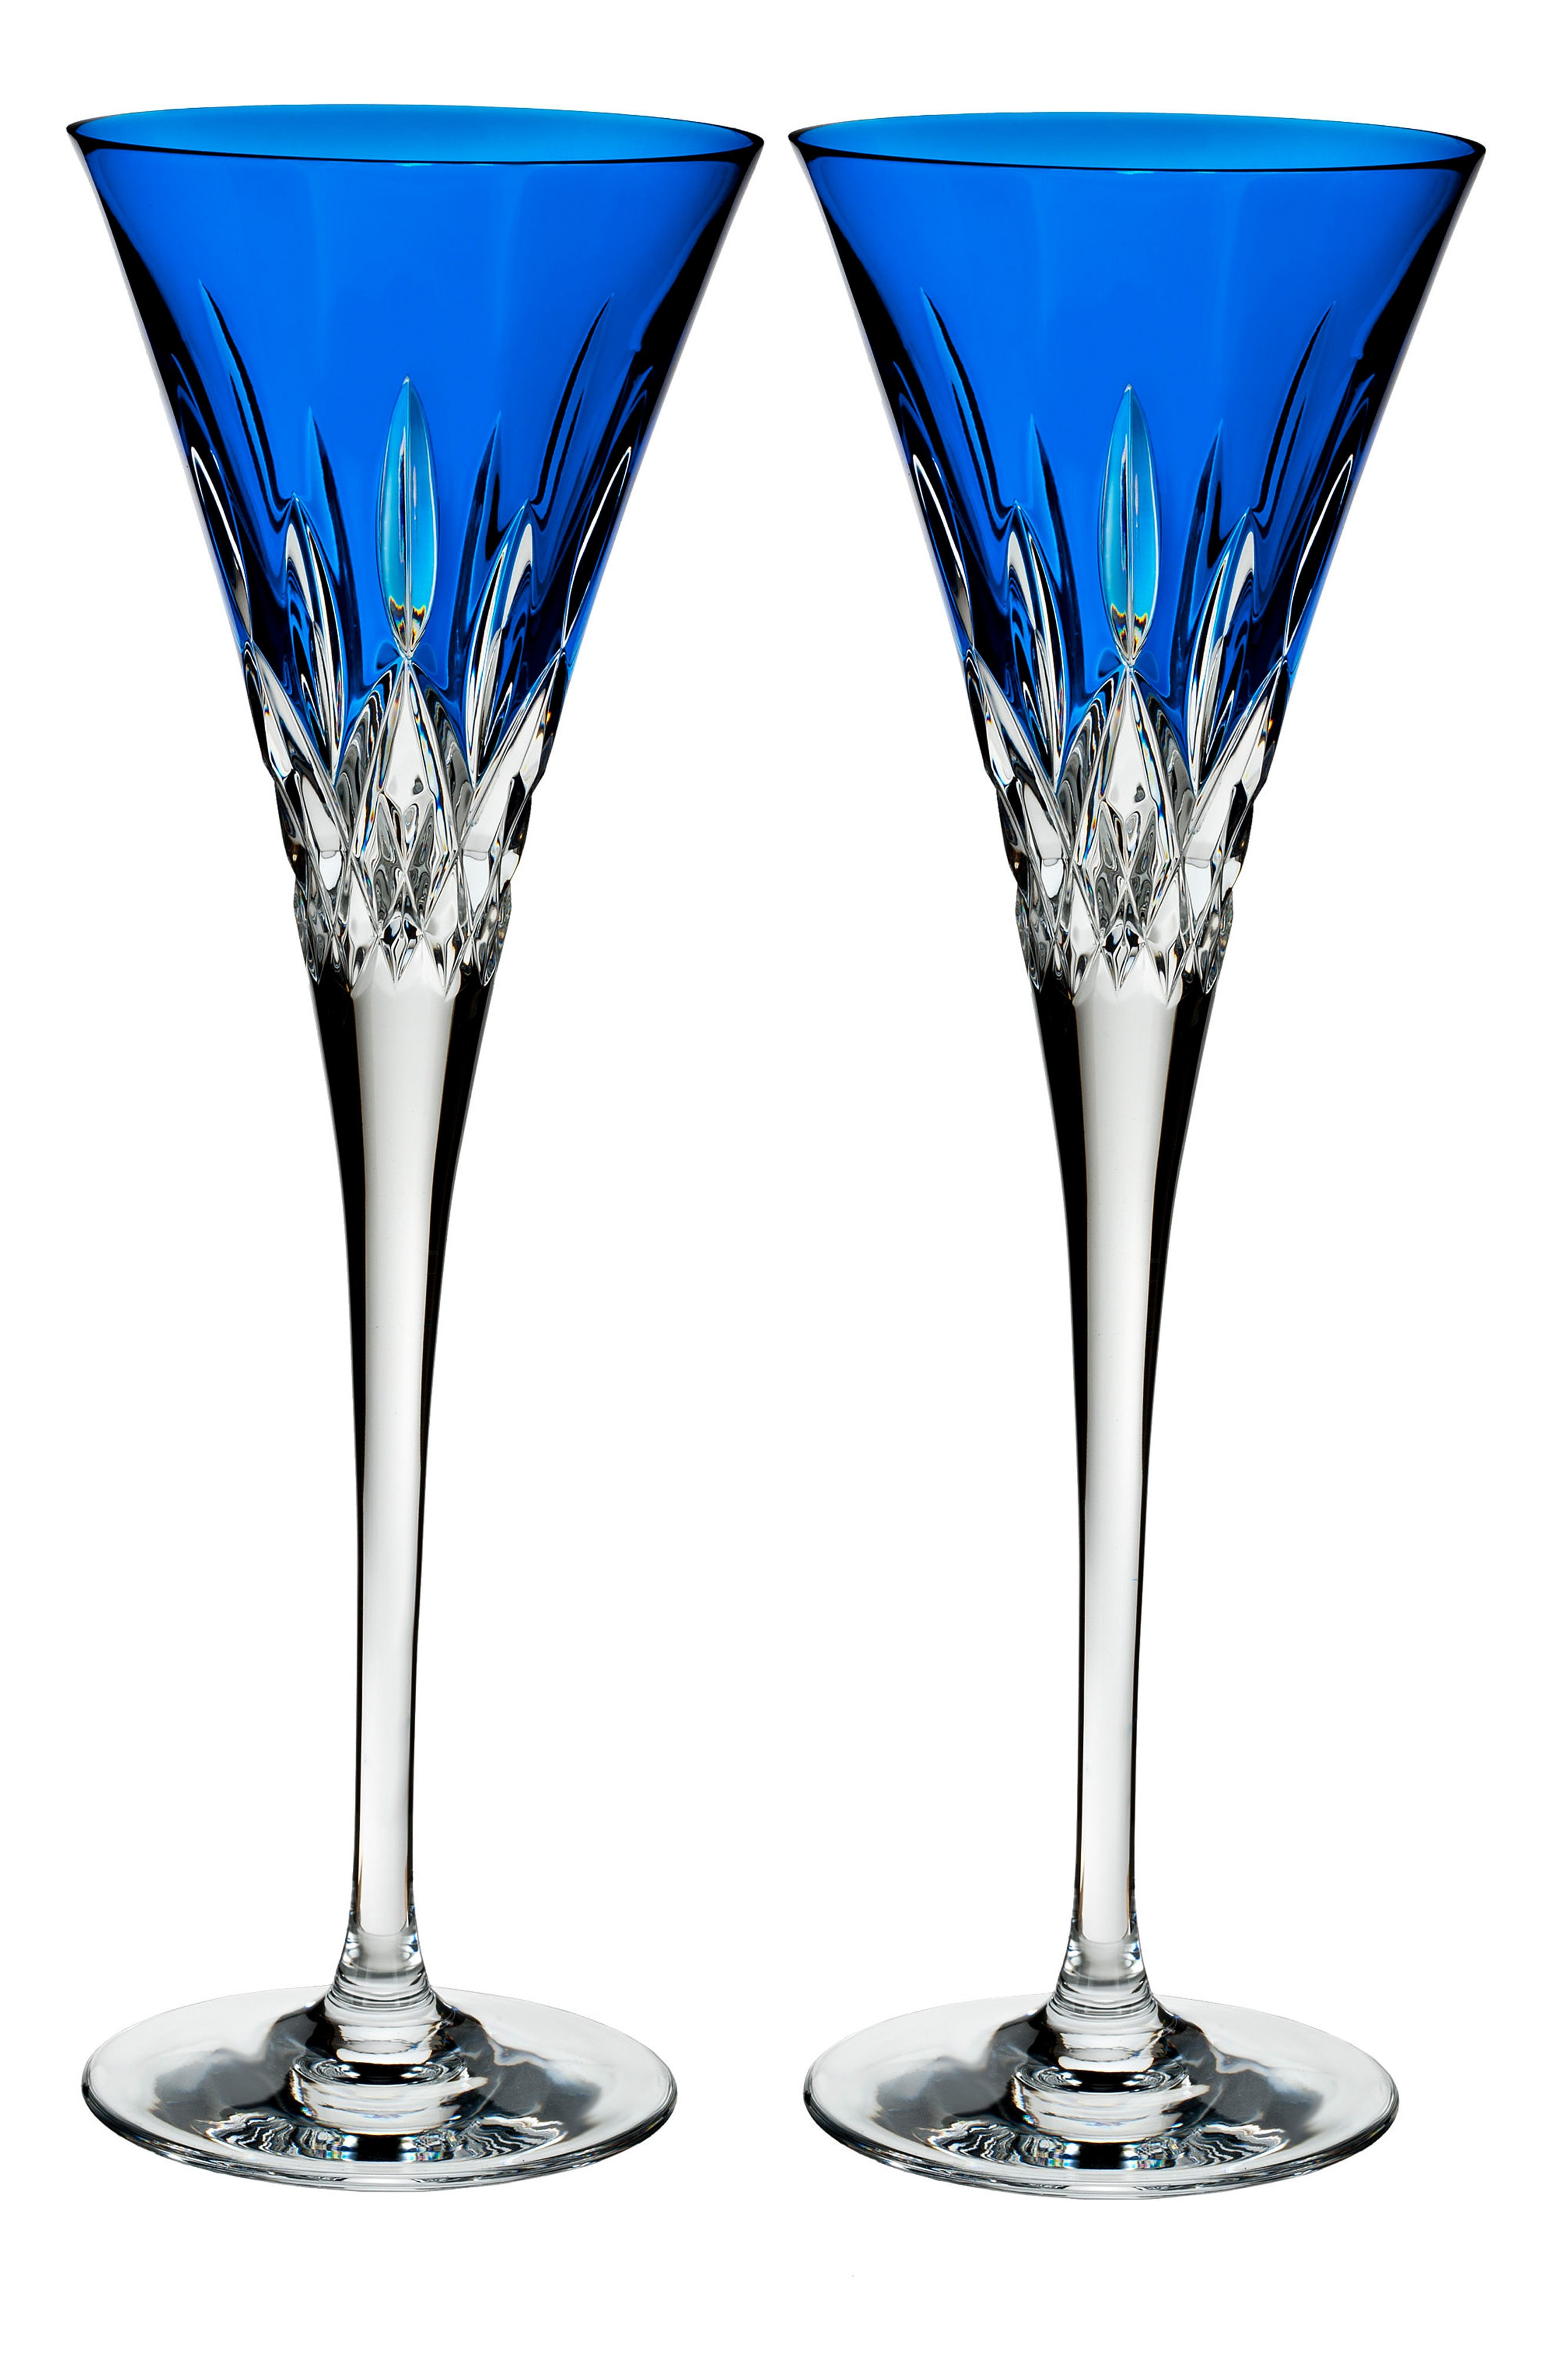 29 Cute Waterford Vase Patterns 2024 free download waterford vase patterns of lead crystal champagne flutes verona lead crystal champagne flute inside waterford lismore pops set of cobalt lead crystal champagne flutes